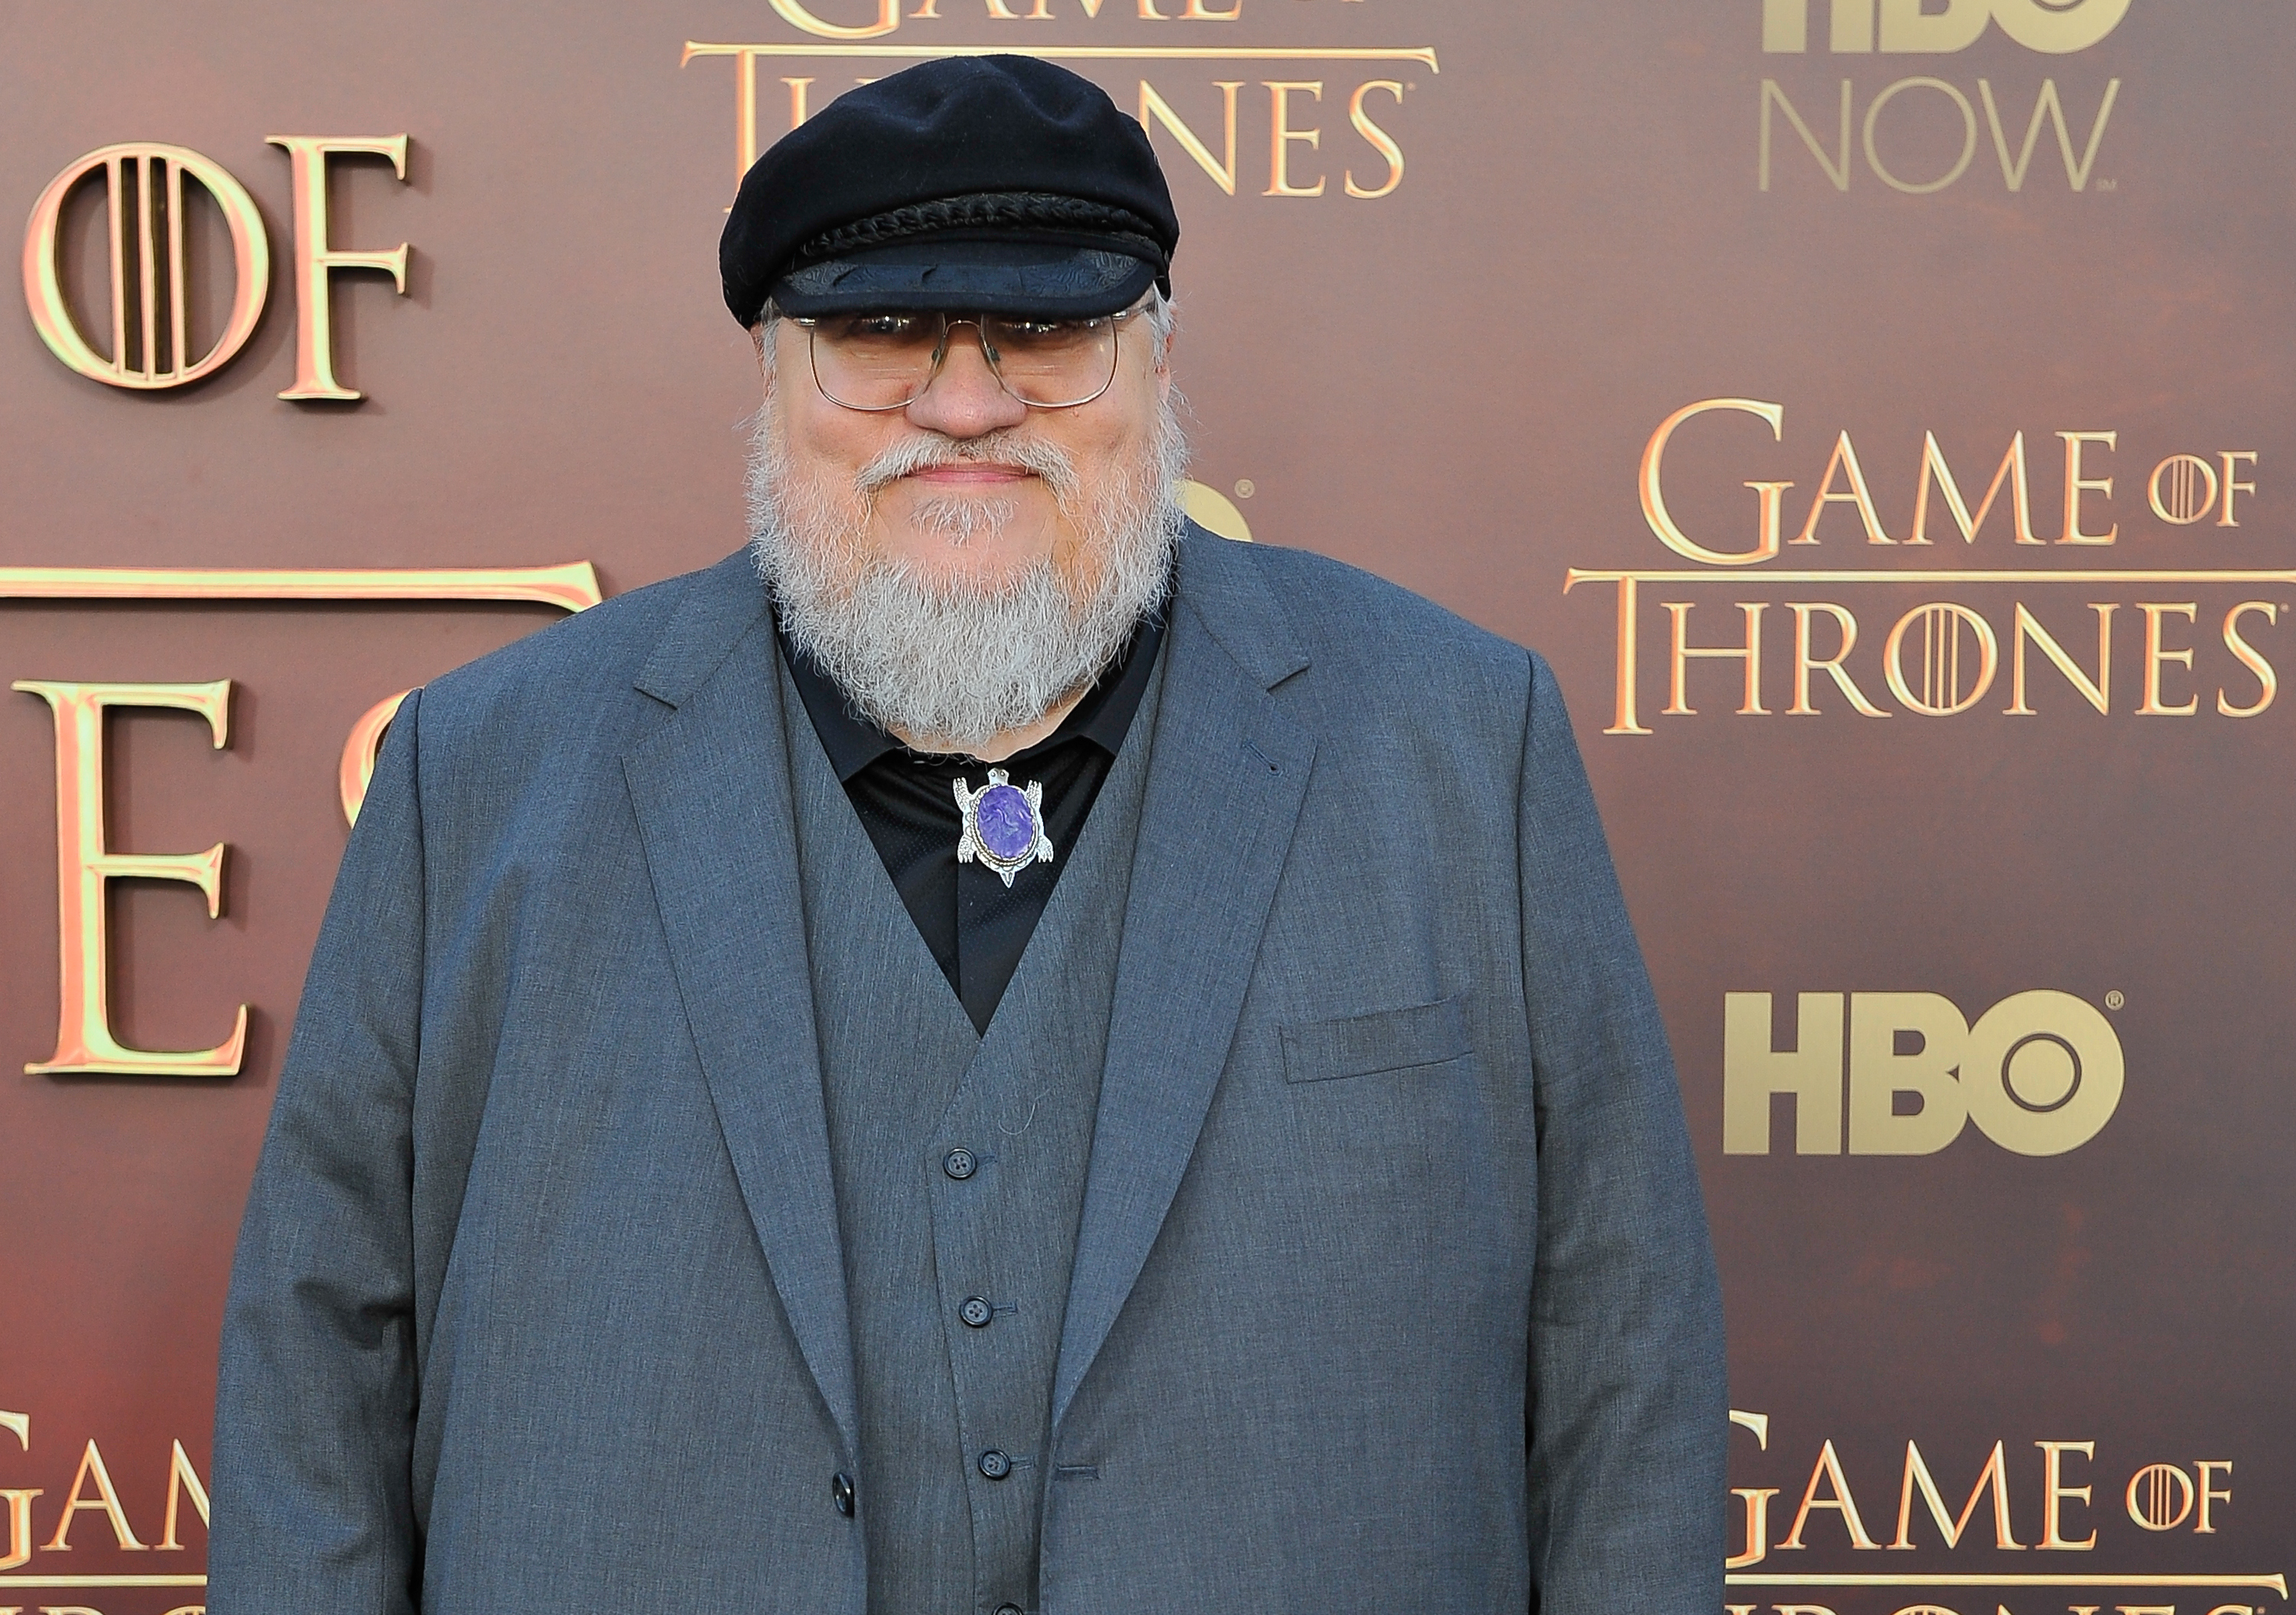 George R.R. Martin Writer/Co-Executive Producer attends HBO's "Game Of Thrones" Season 5 San Francisco Premiere at San Francisco Opera House on March 23, 2015 in San Francisco. (Steve Jennings—WireImage/Getty Images)